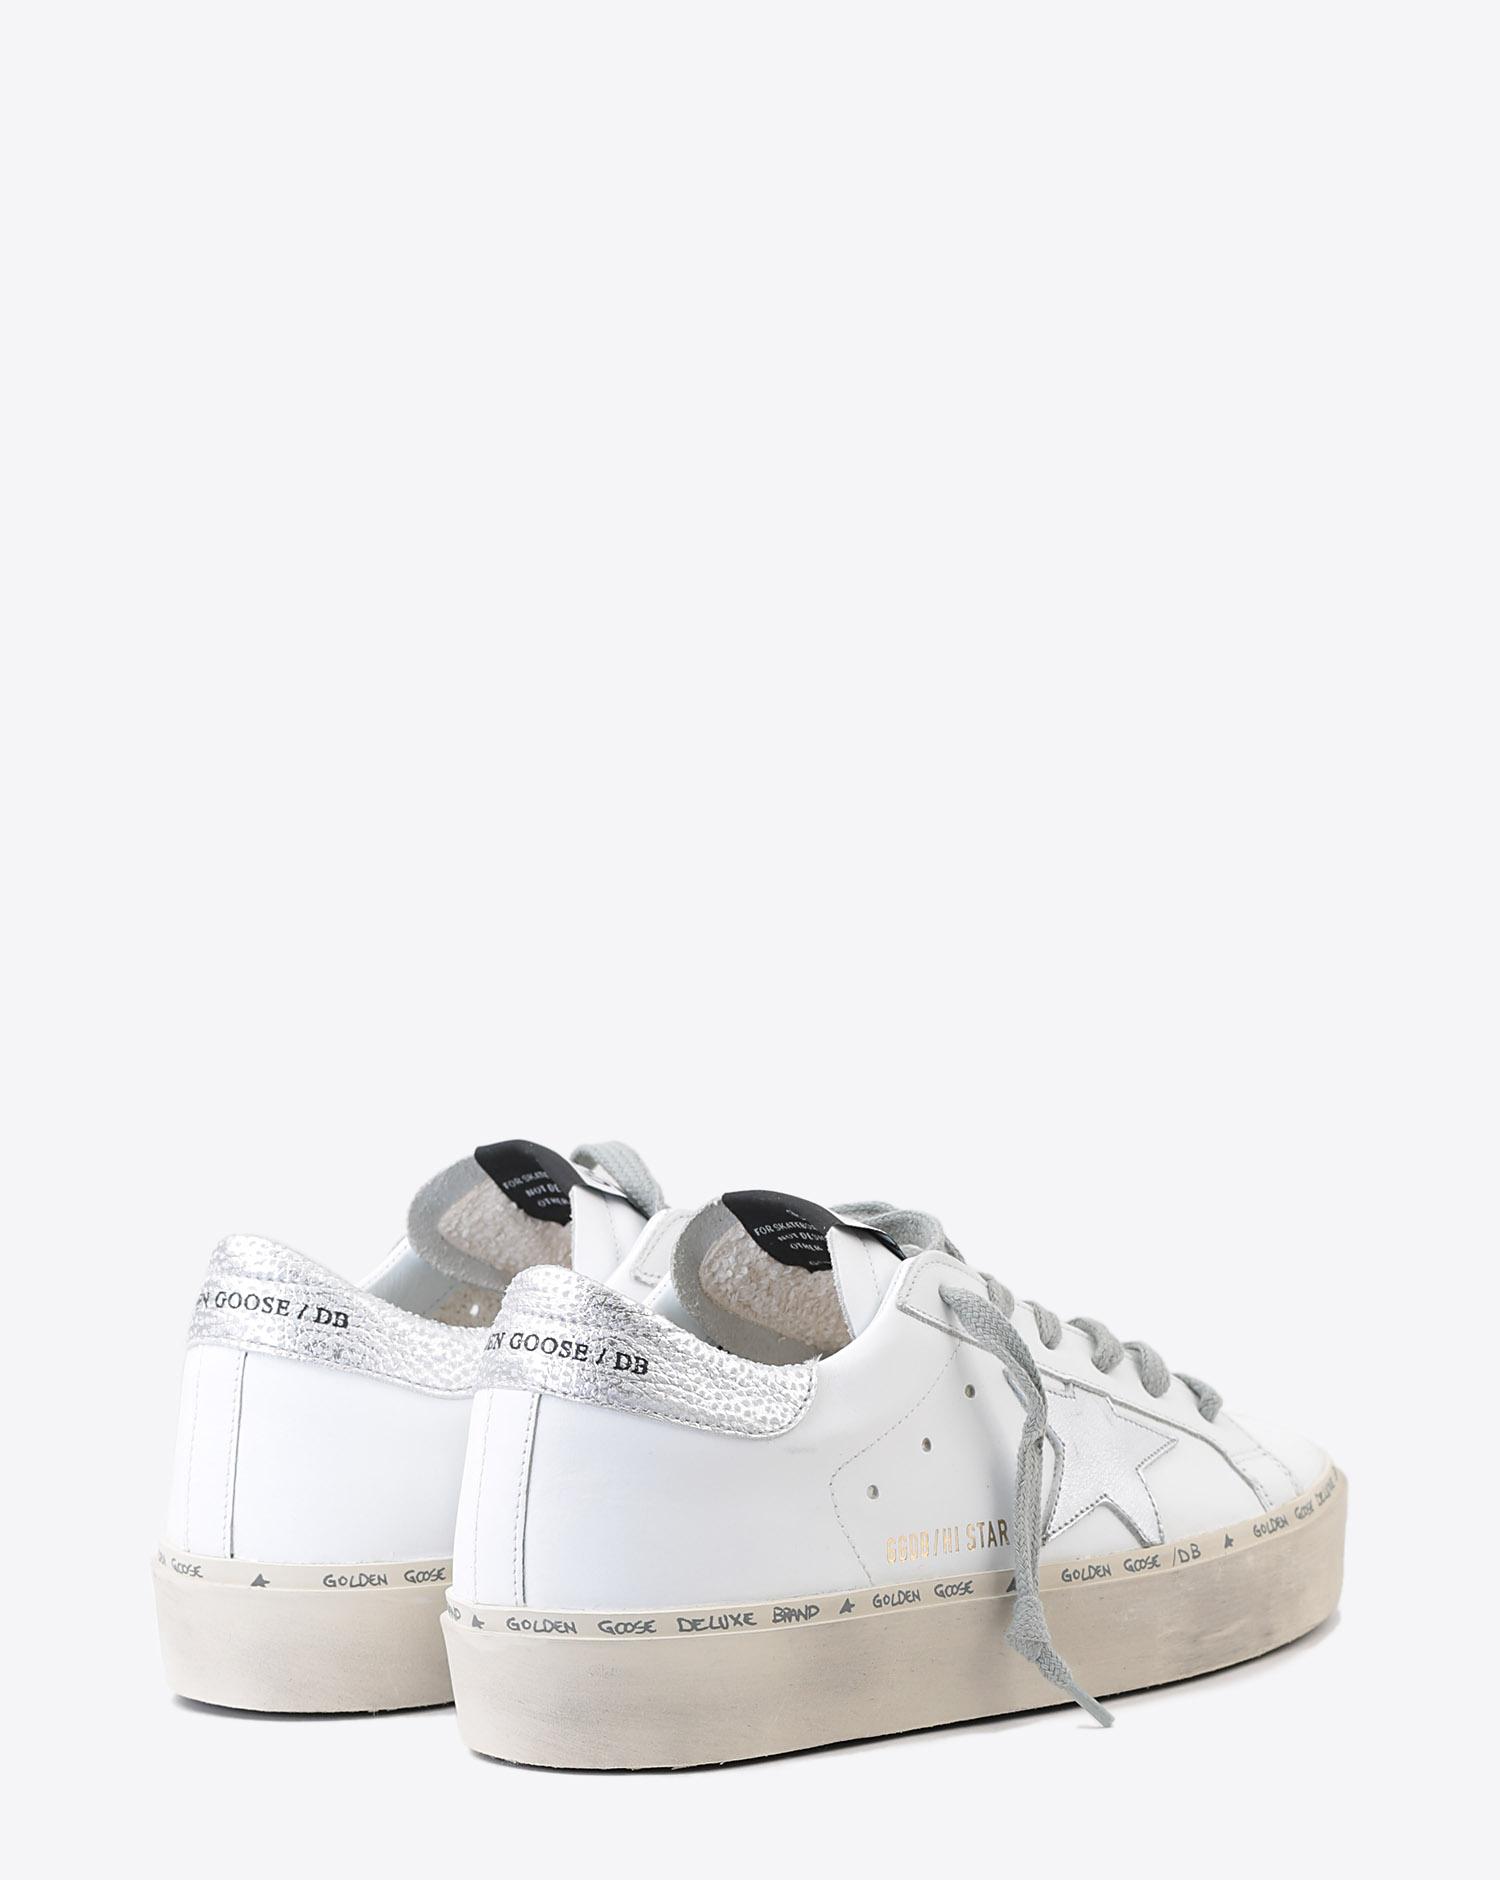 Golden Goose Woman Pré-Collection Sneakers Hi Star- White Leather - Shiny Star  